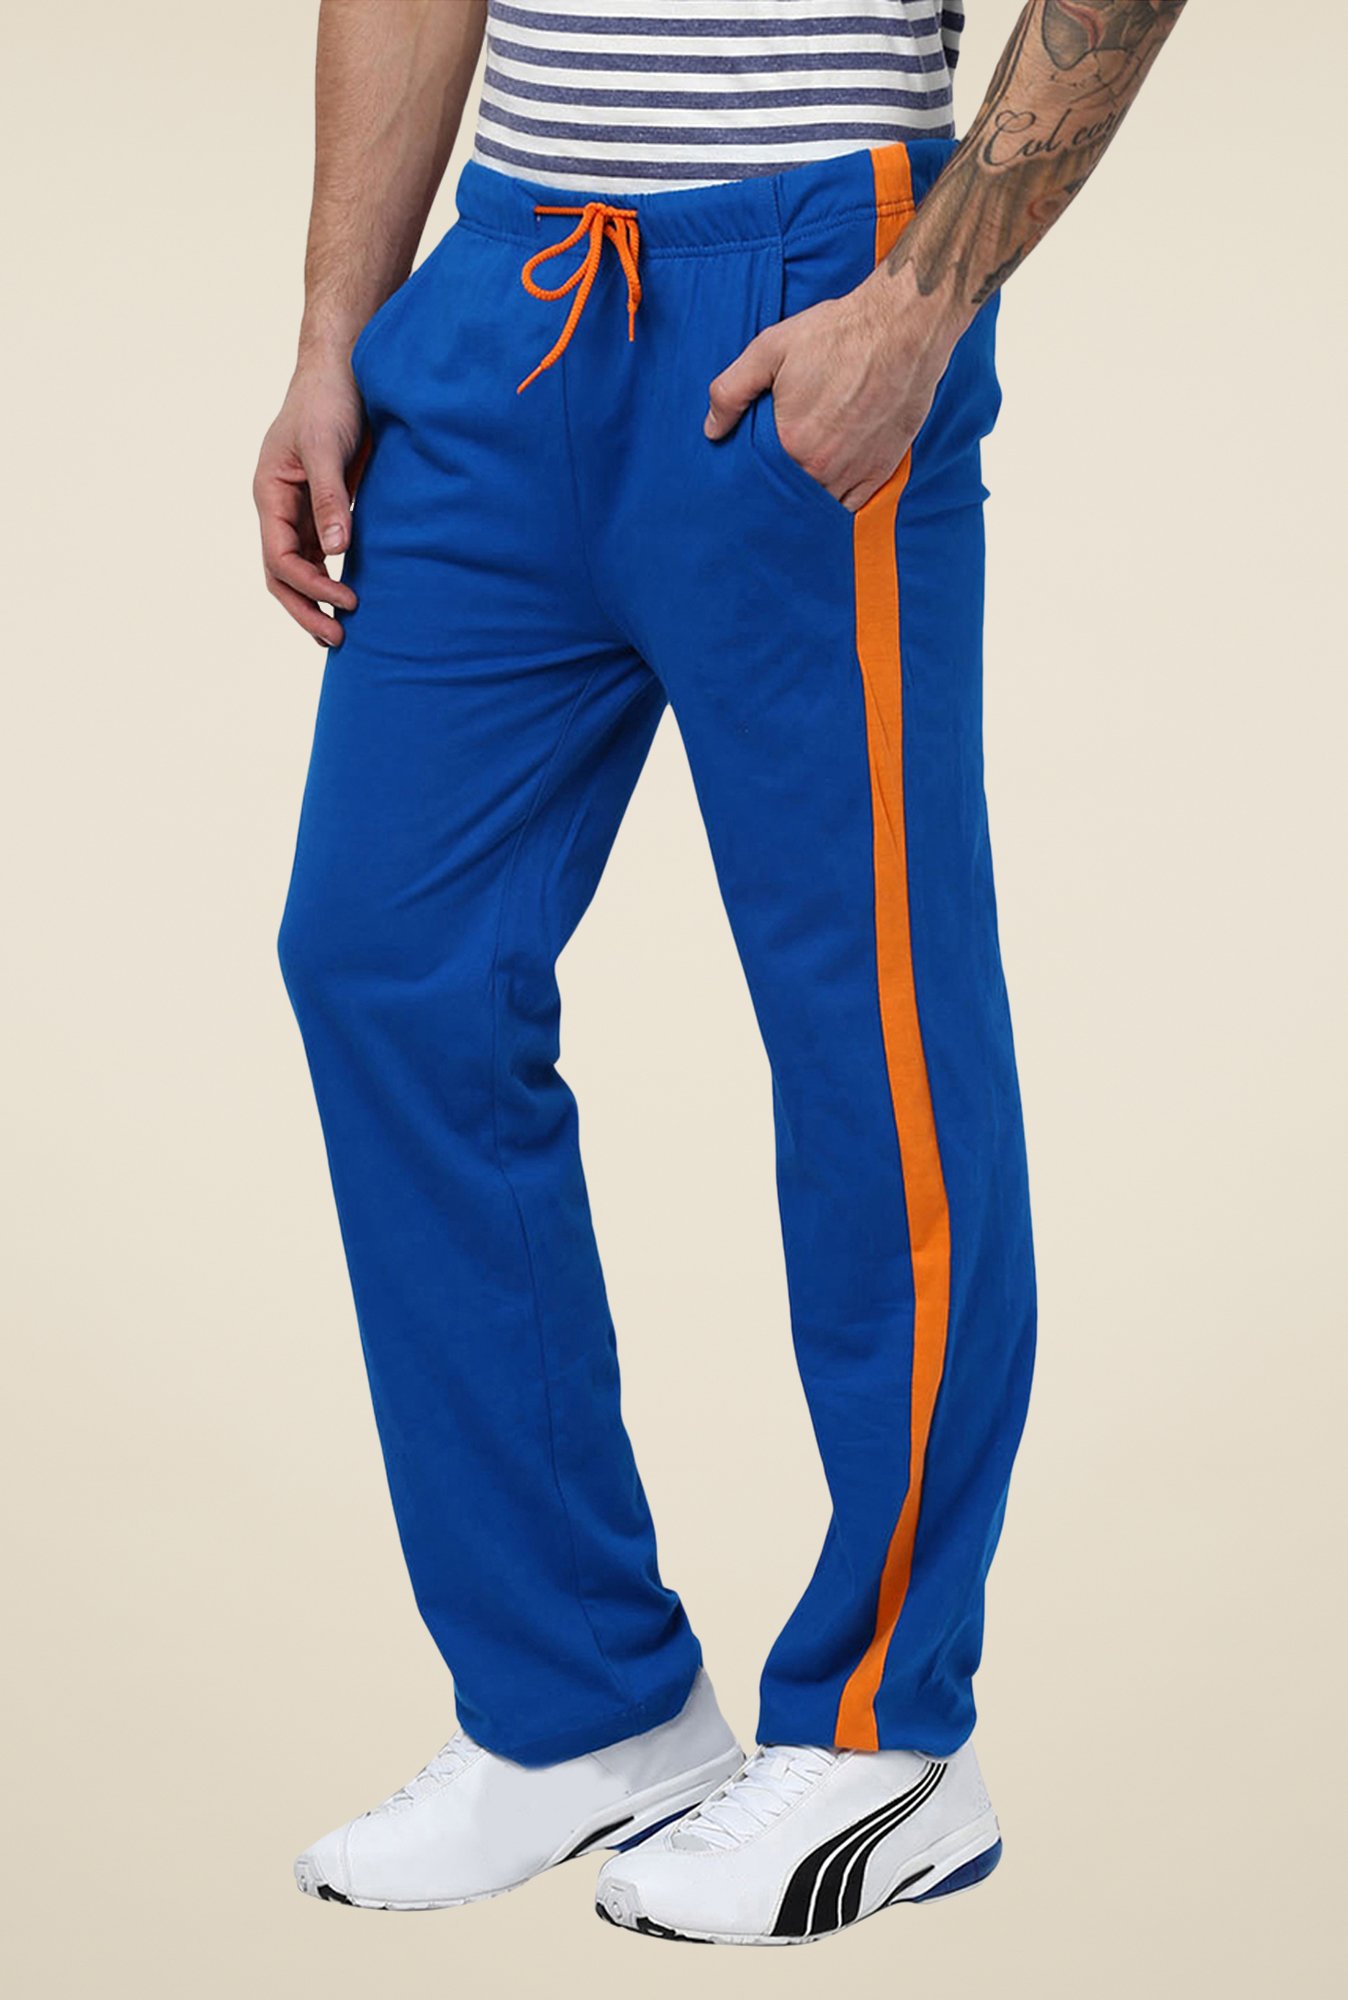 PUMA The Unity Collection Tfs Kid's Track Pants 597831_01 in Chennai at  best price by Sports World - Justdial